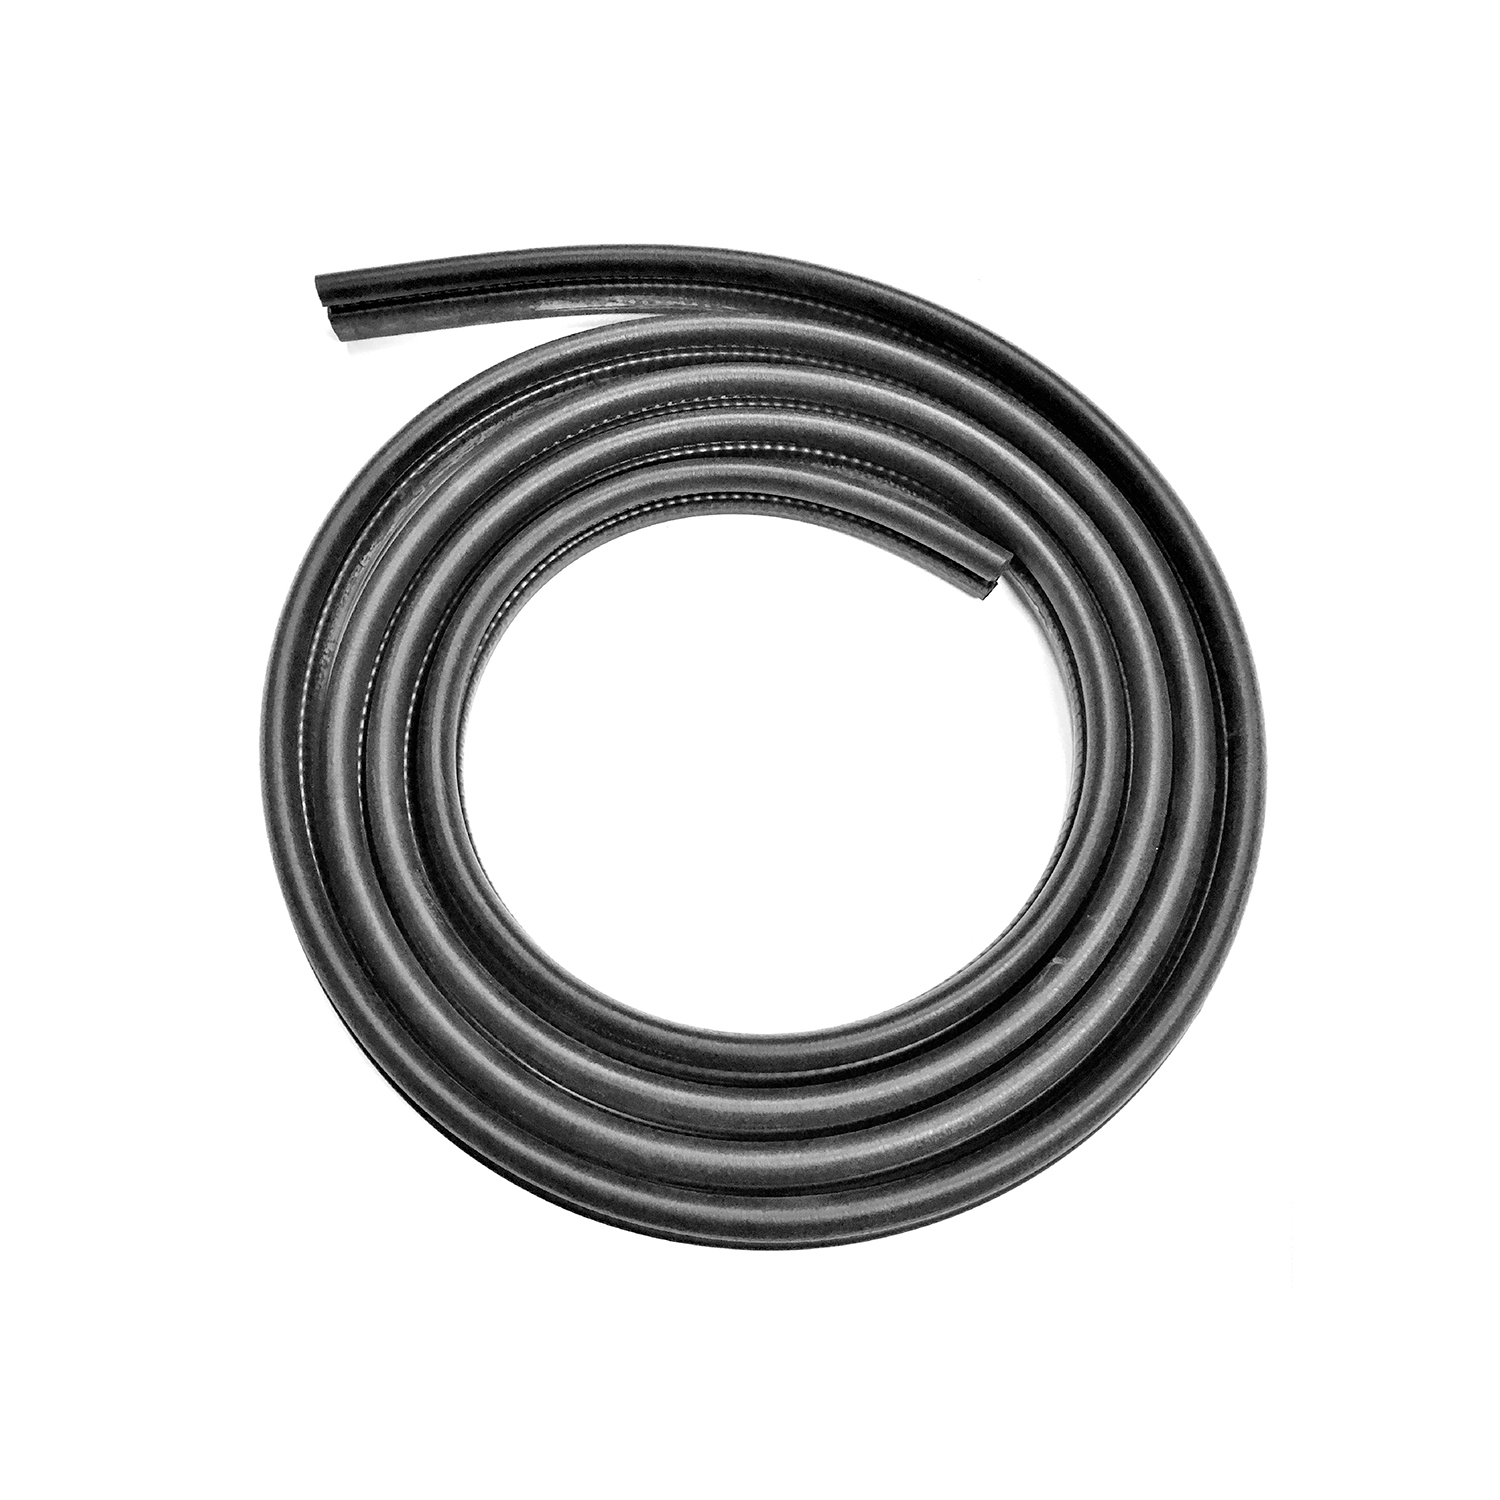 2005 Ford E-450 Super Duty Door seal, '04-'14 Ford E-Series full size van models, fits front left or right-LM 110-VH